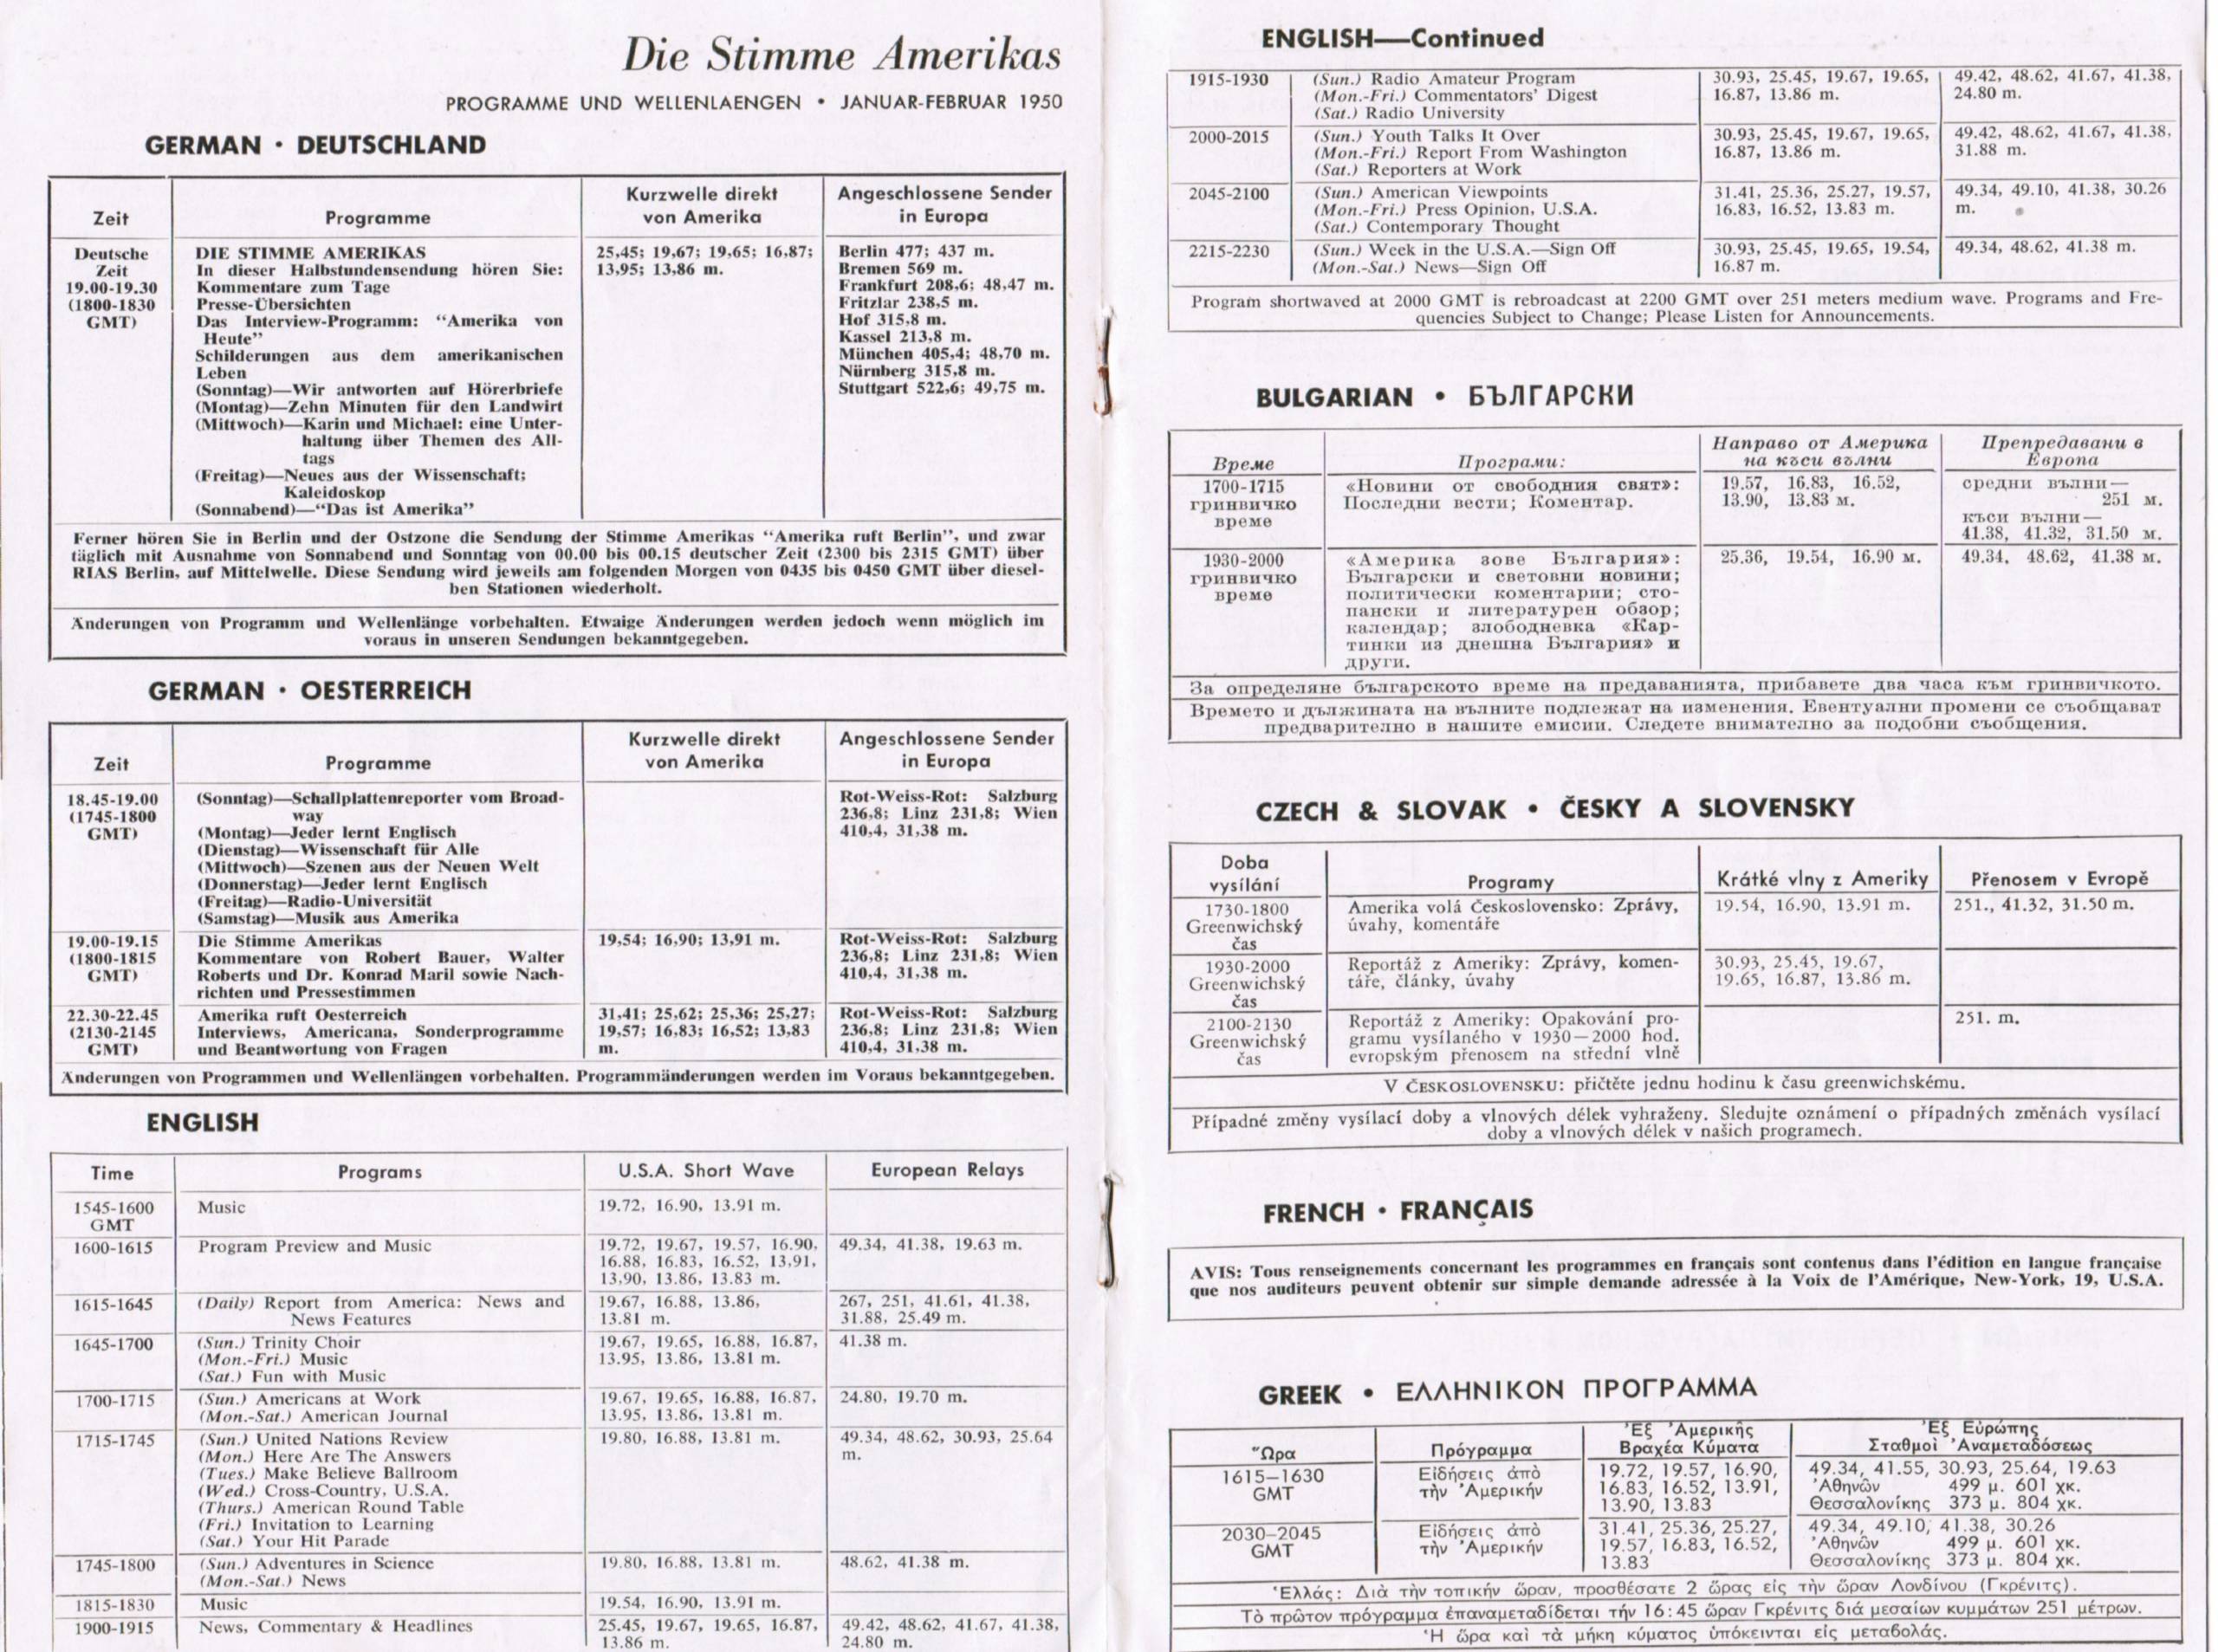 Voice of America Die Stimme Amerikas German Service brochure pages with VOA program schedules  (partial), January-February 1950.